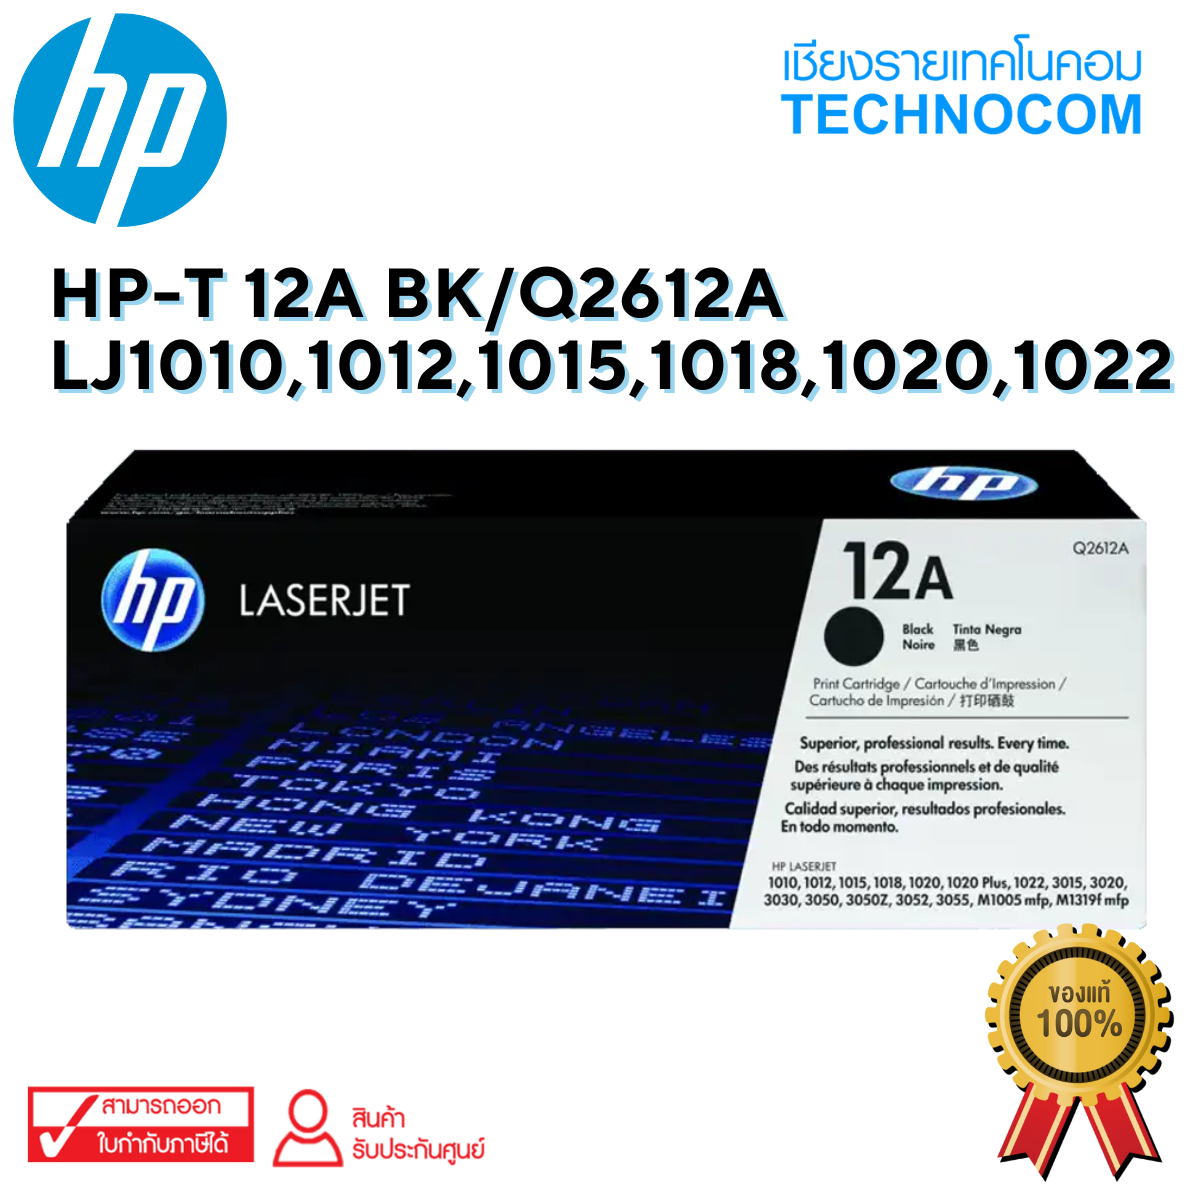 HP-T 12A BK/Q2612A /FOR LJ 1010,1012,1015,1018,1020,1022